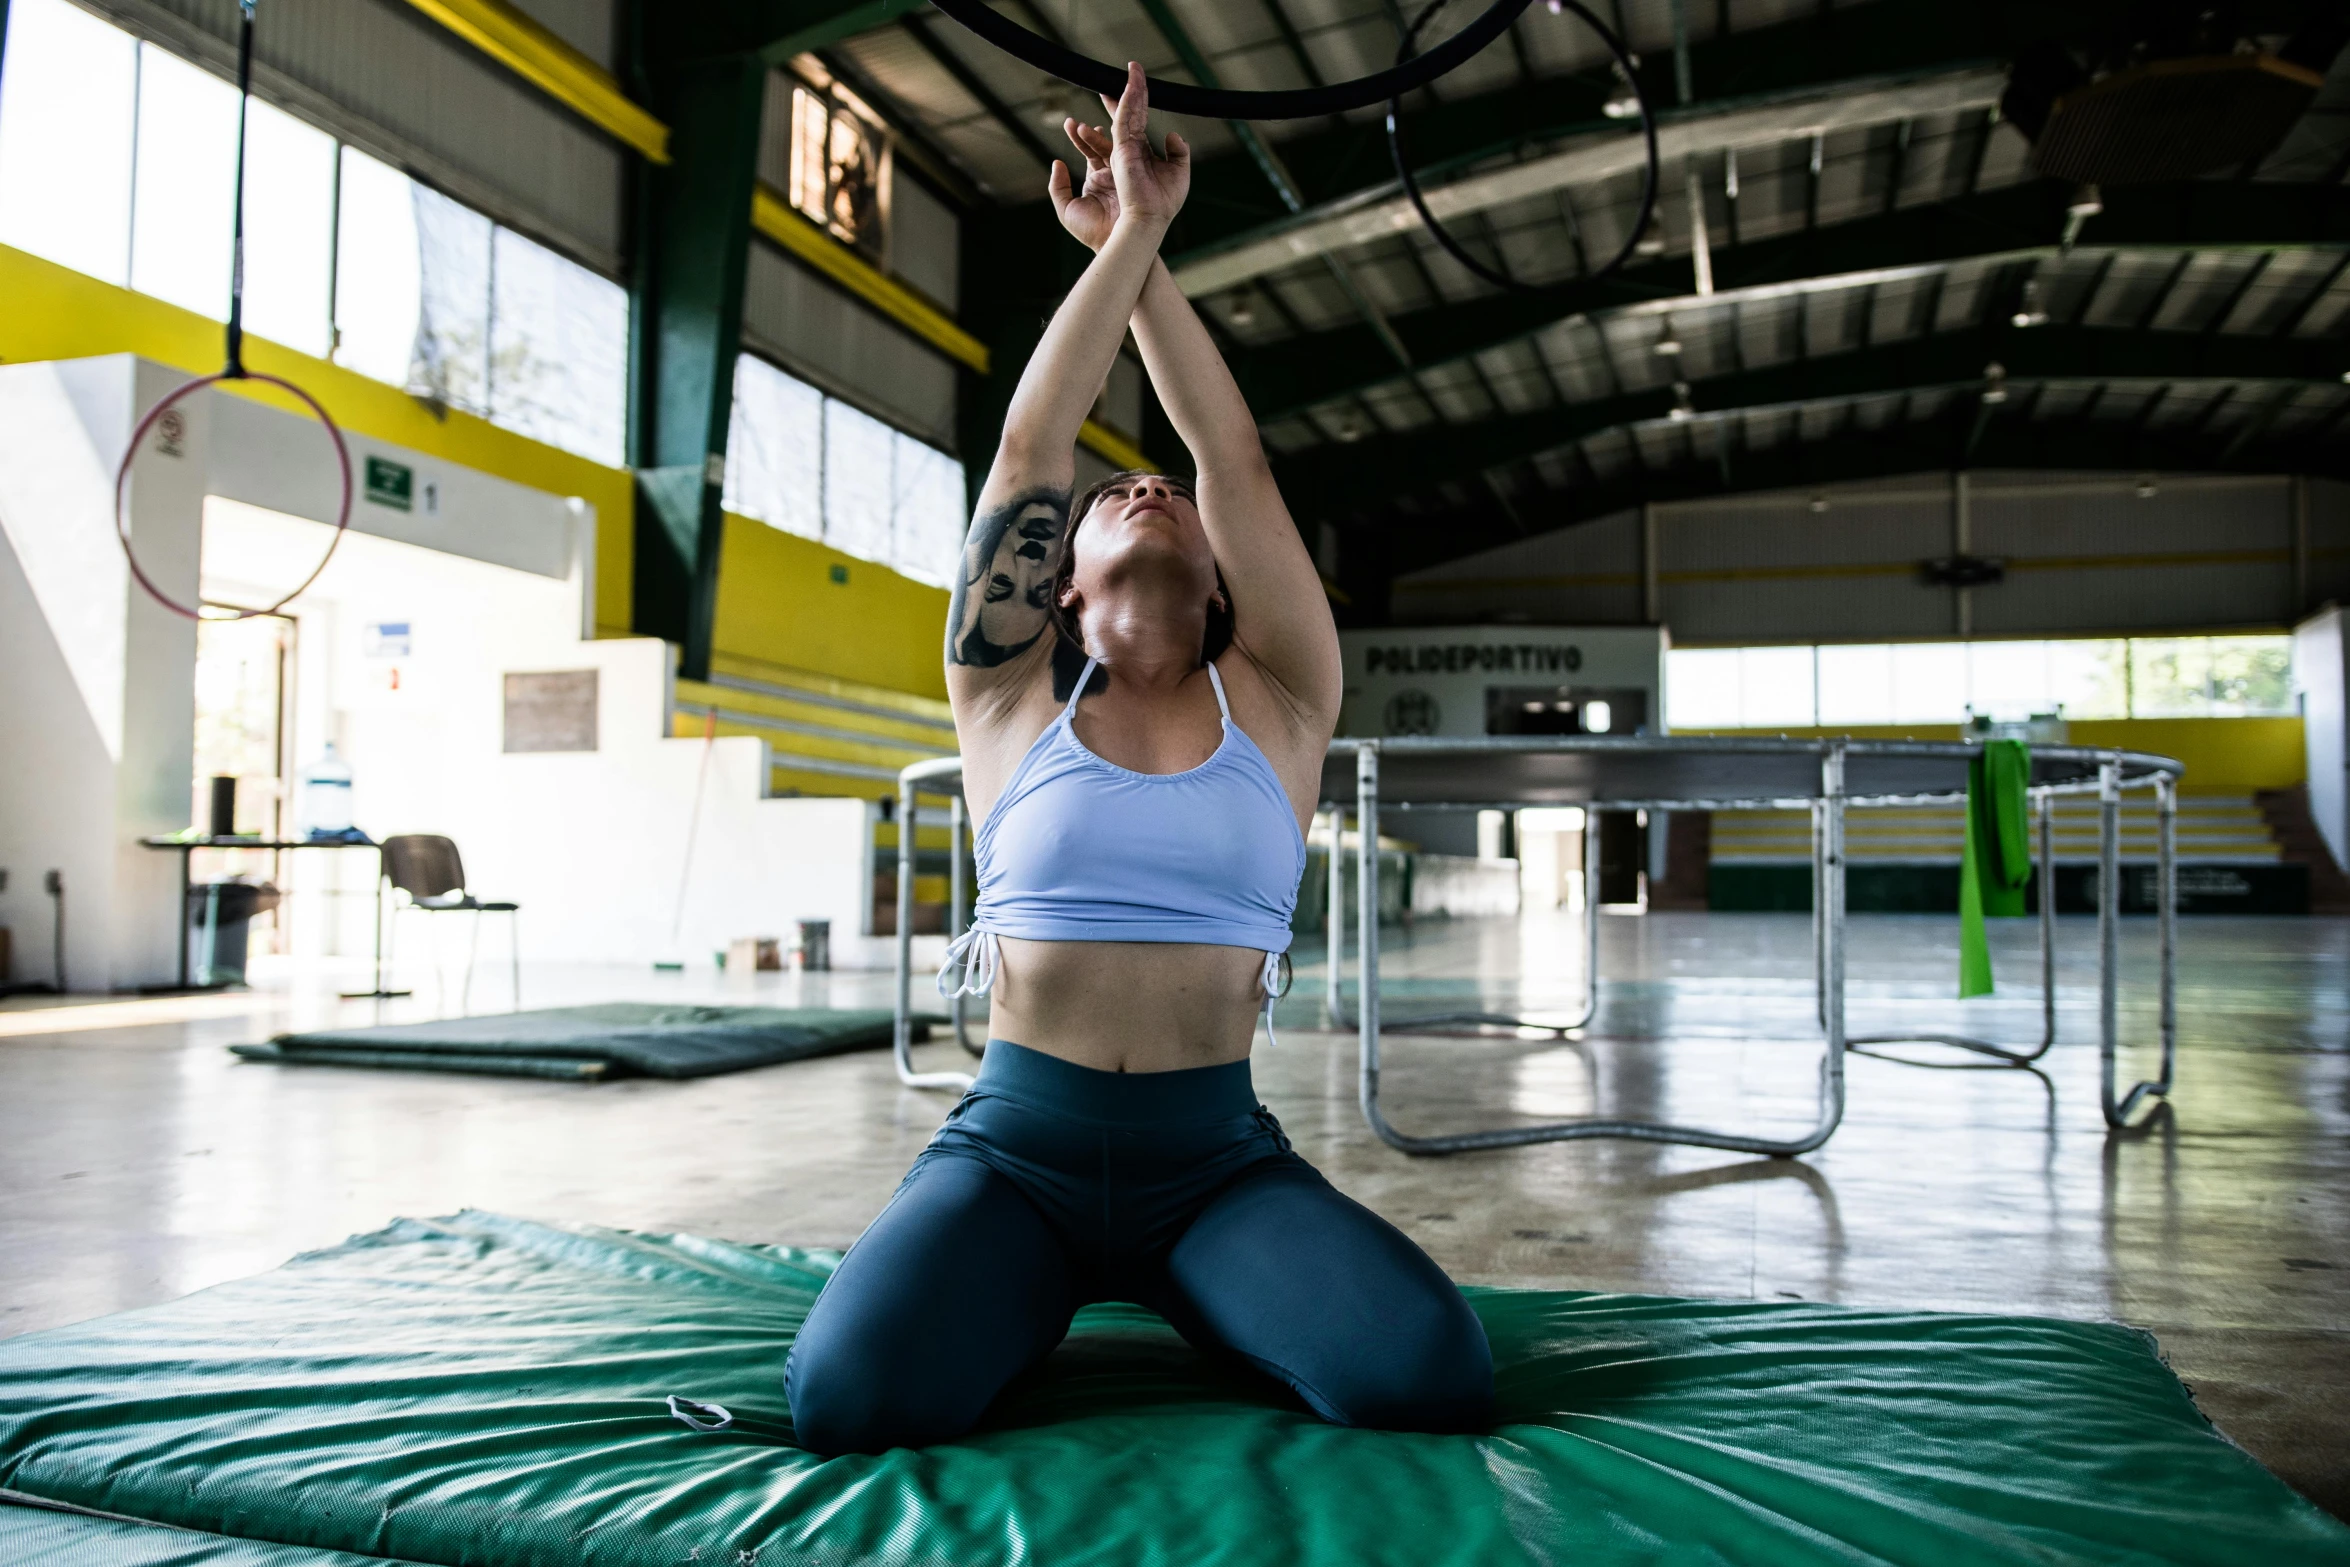 the woman practices yoga on a mat in the gym